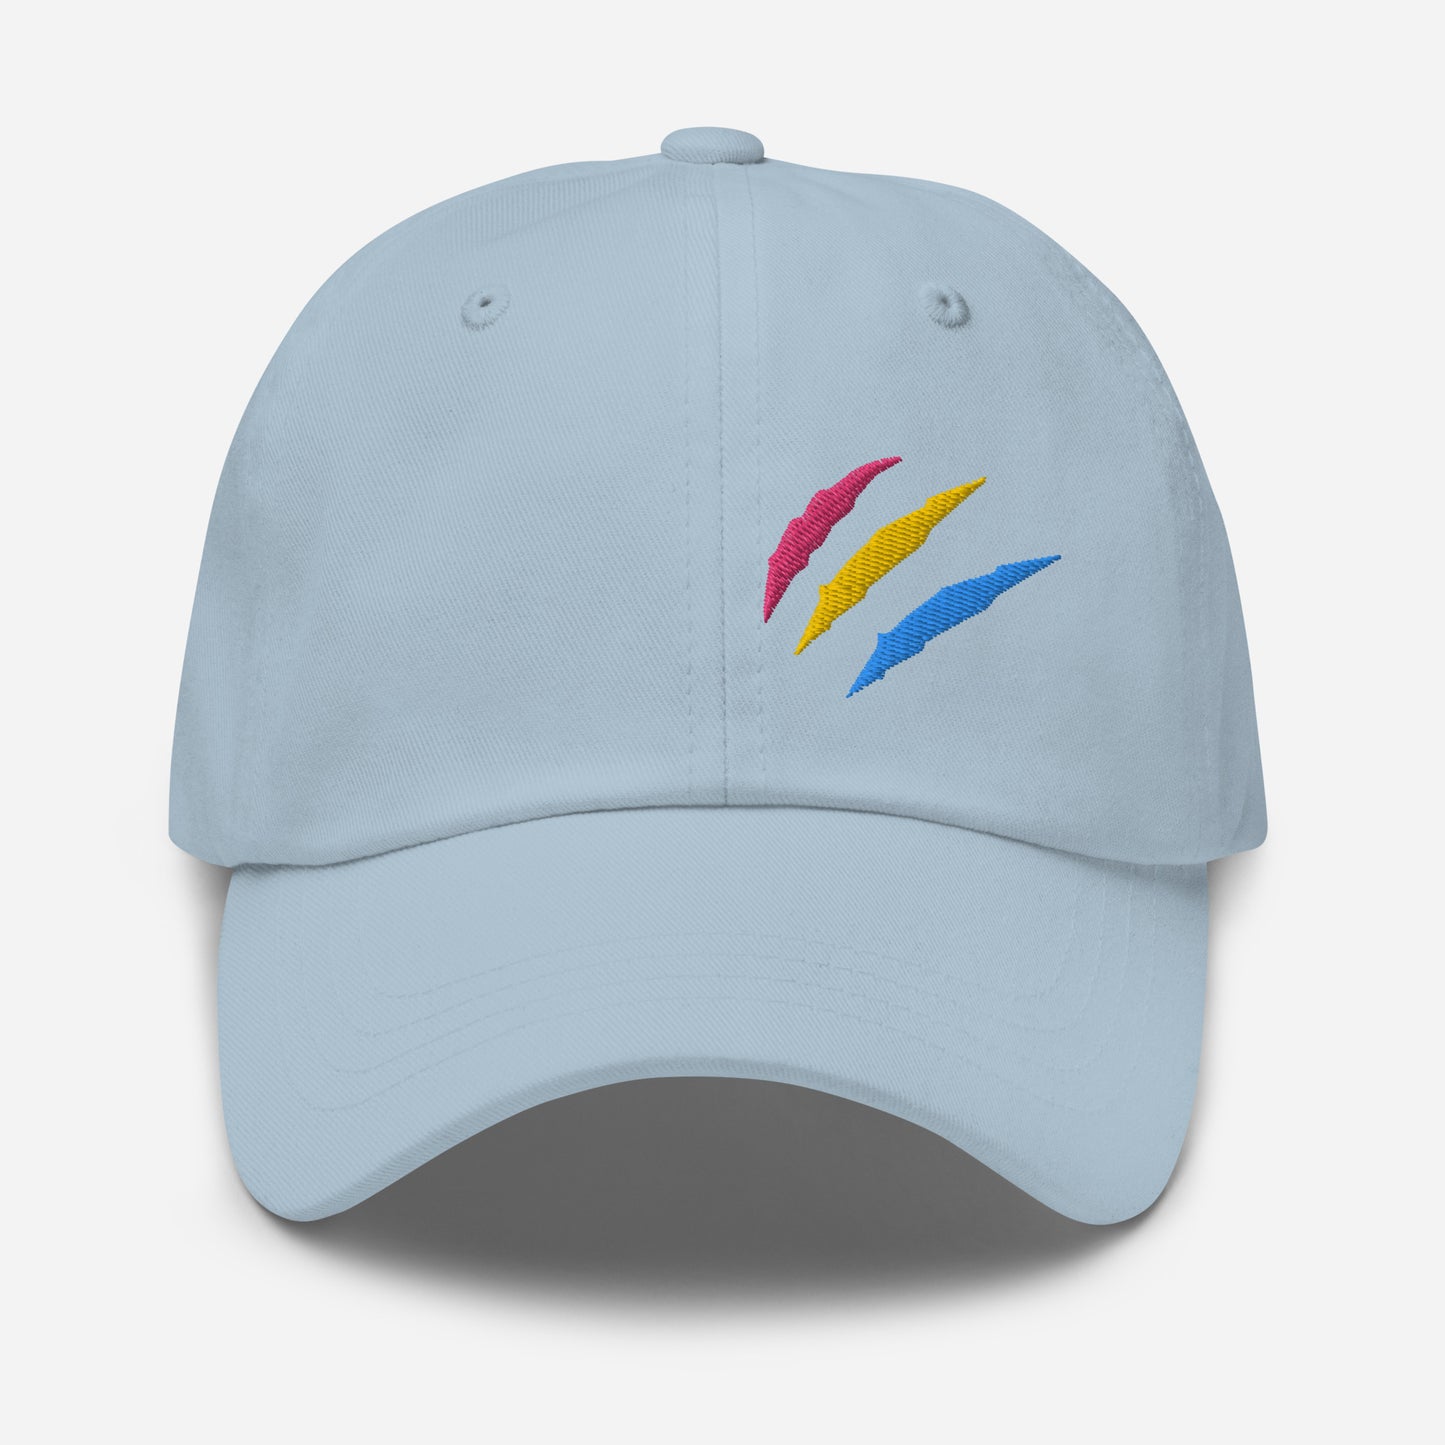 Light blue baseball hat featuring pansexual pride scratch mark embroidery with a low profile, adjustable strap.